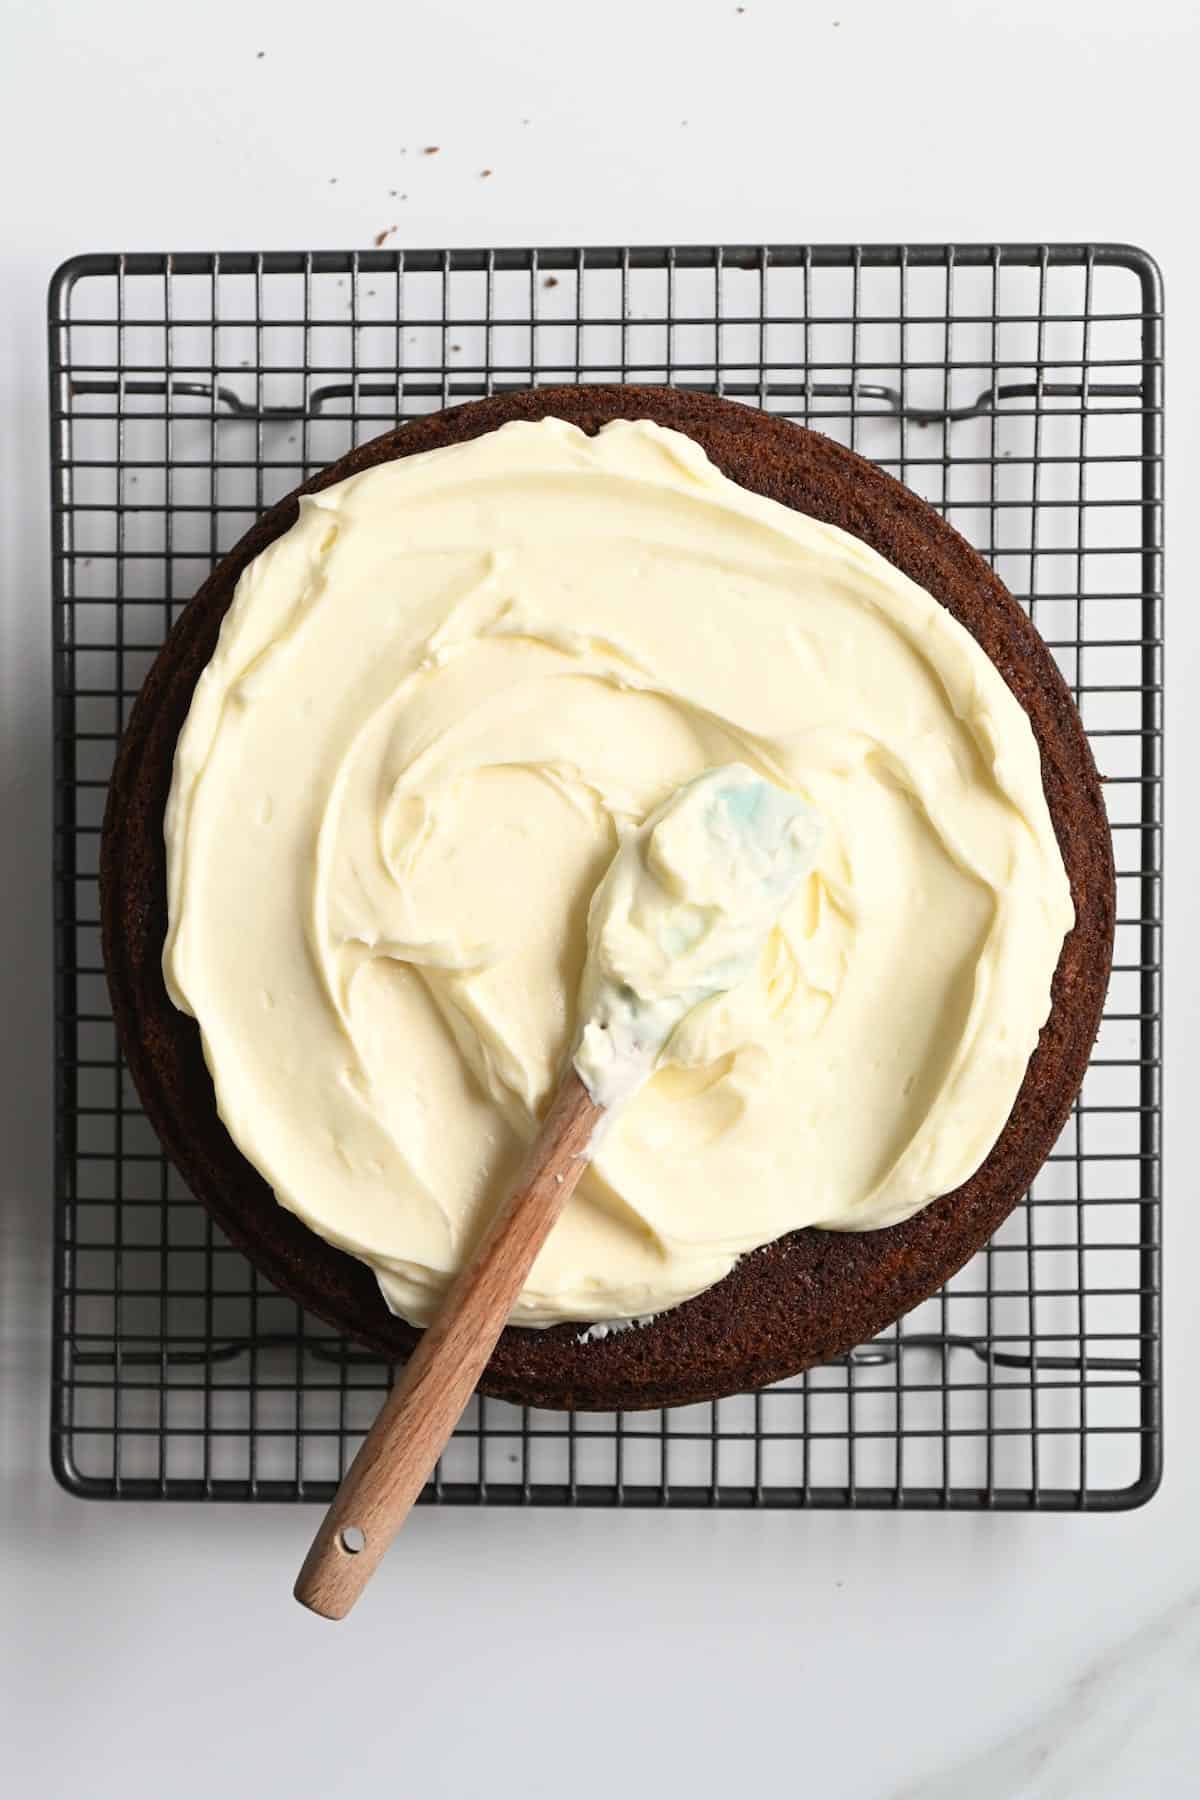 Frosted carrot cake and a spoon with frosting on top of it